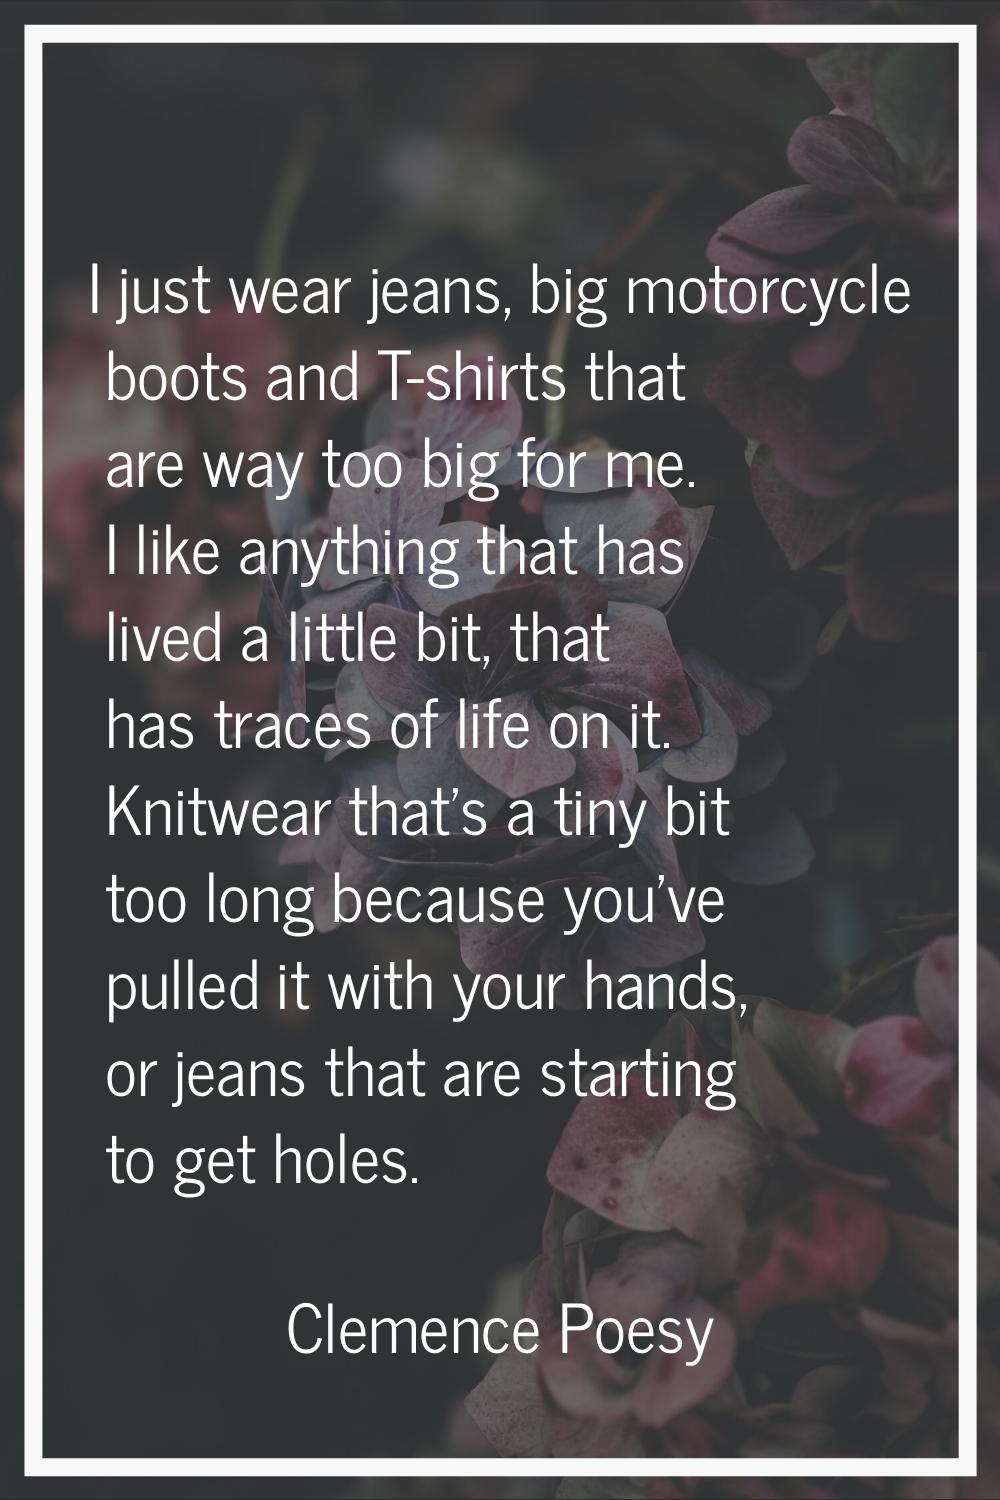 I just wear jeans, big motorcycle boots and T-shirts that are way too big for me. I like anything t